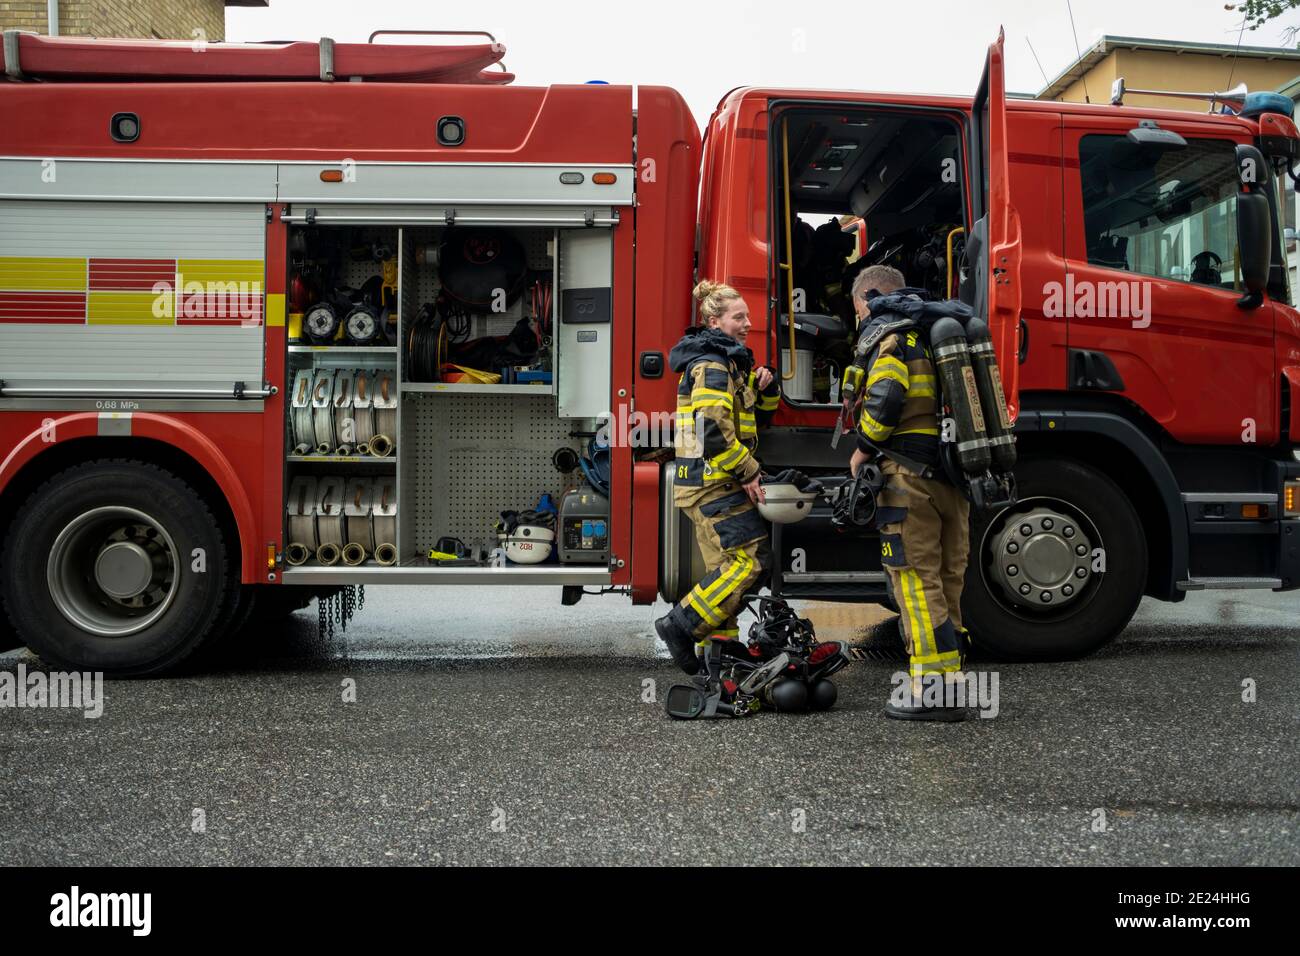 Firefighters in front of fire engine Stock Photo